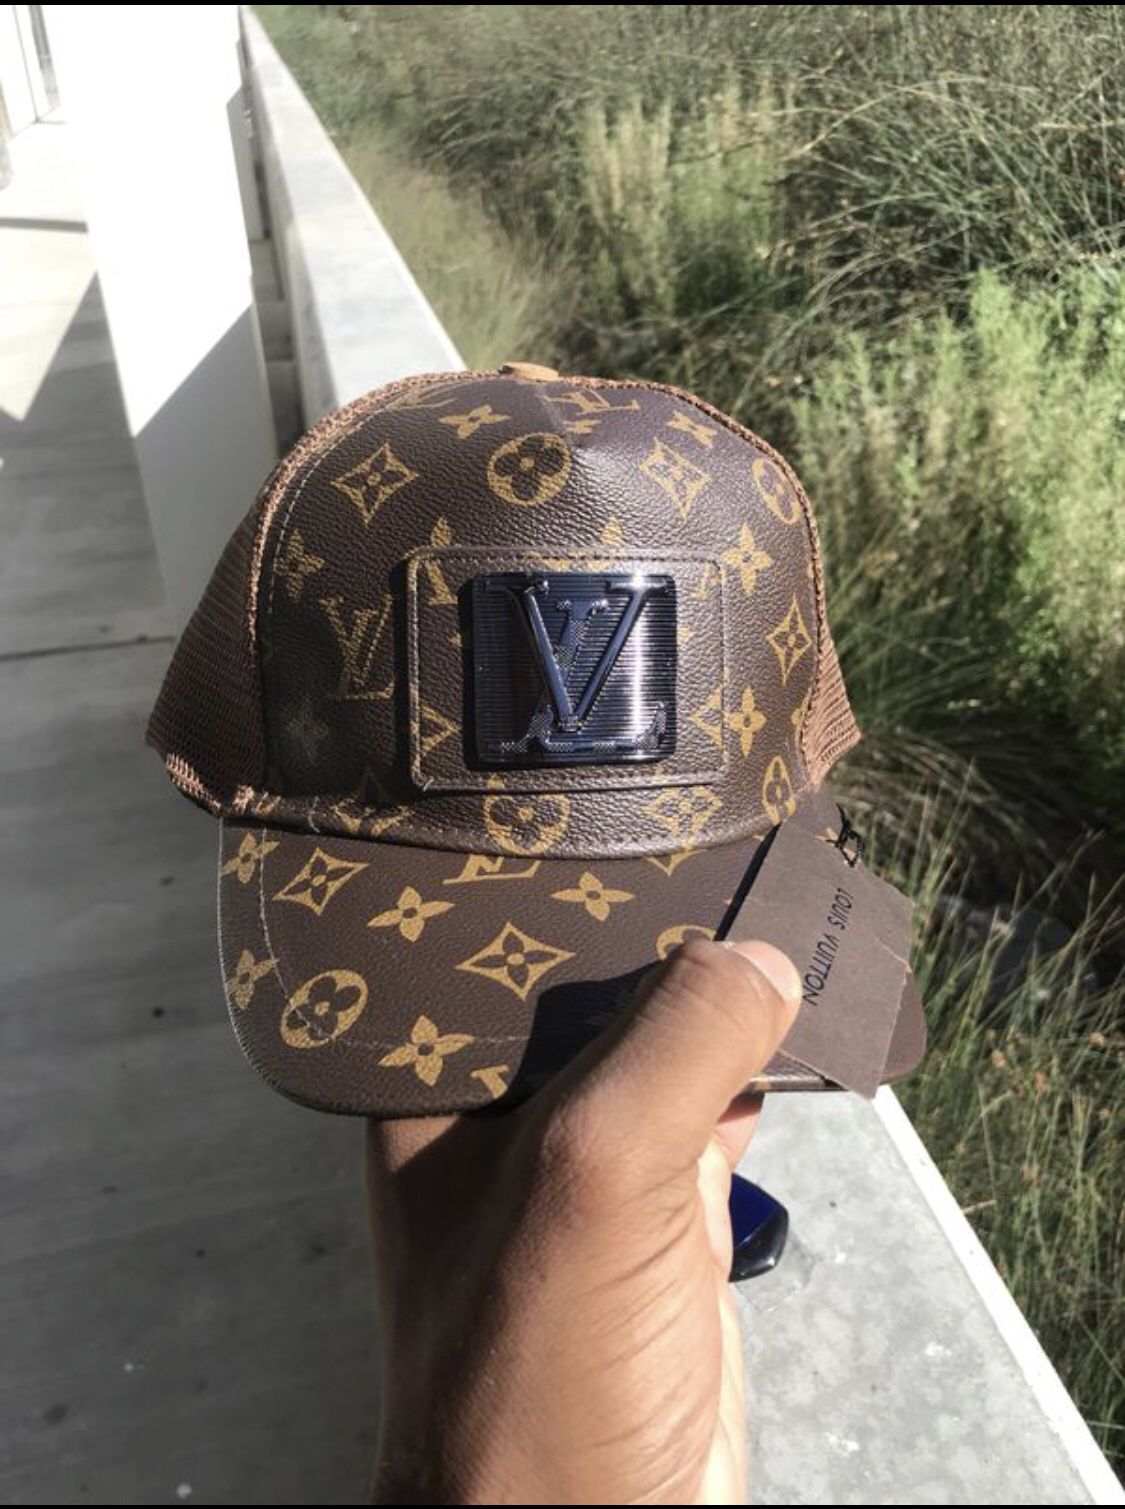 Louis Vuitton IPad Pro/Air 9.6 inch cover for Sale in Carlsbad, CA - OfferUp